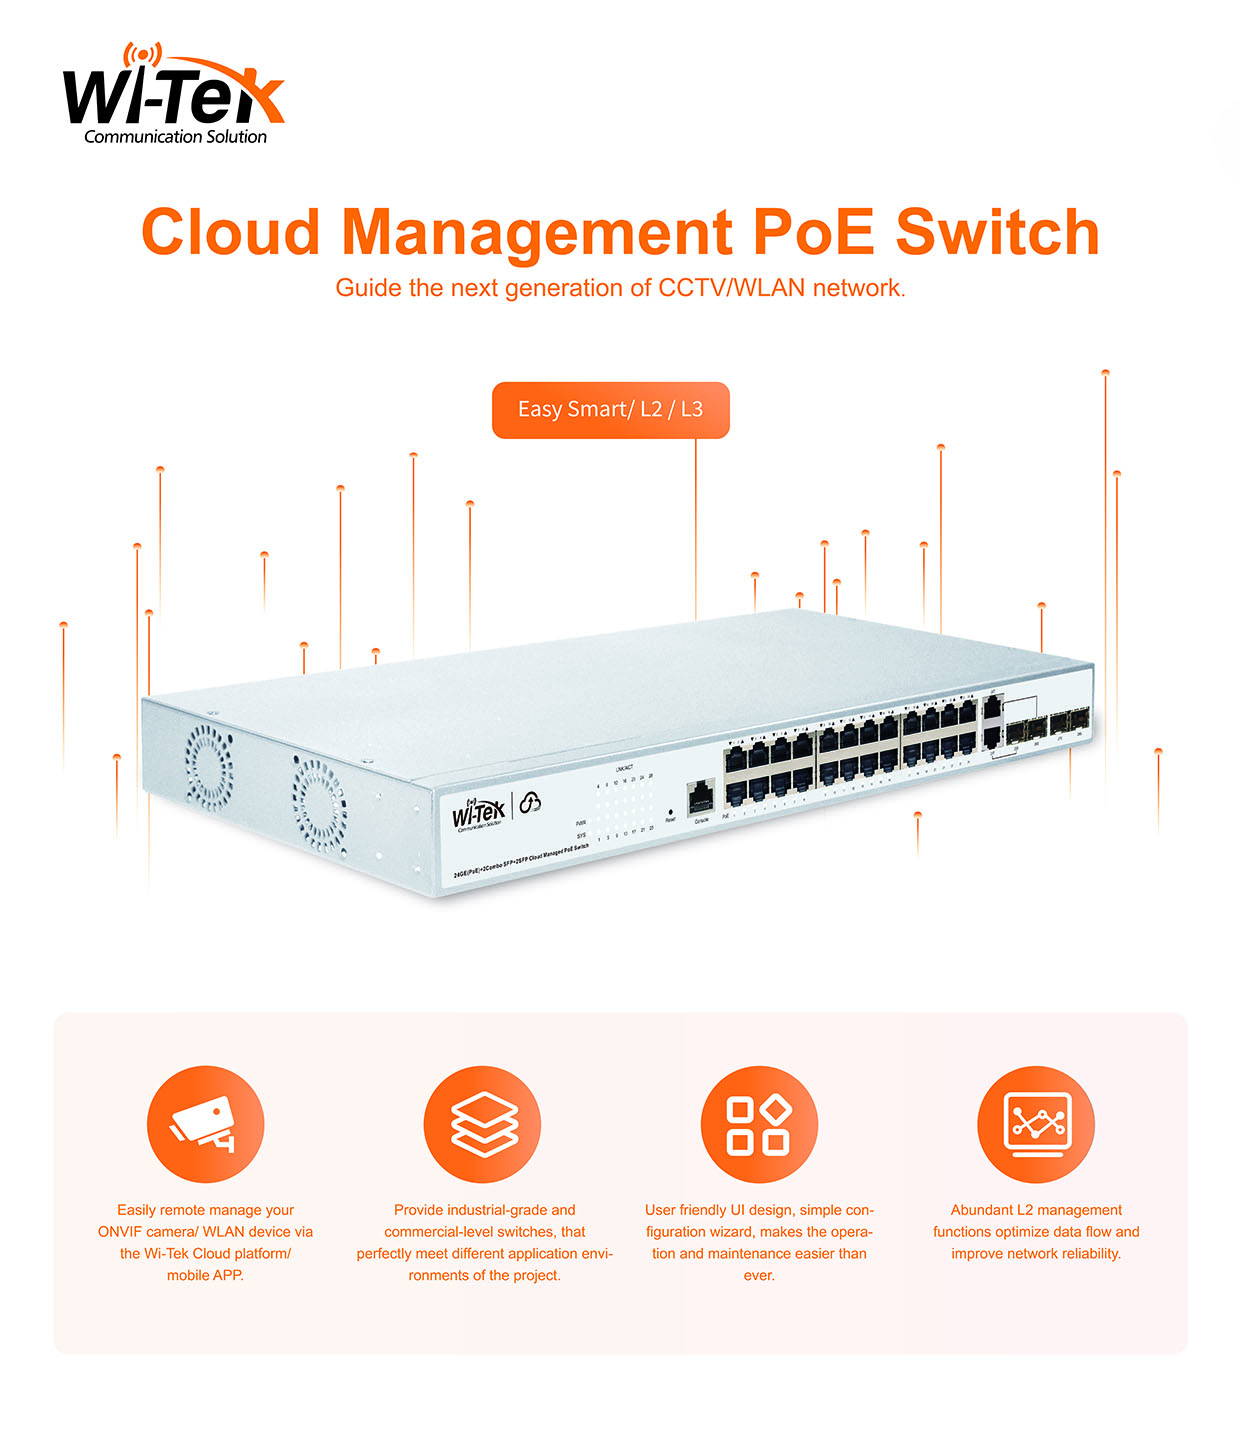 Wi-Tek on X: Cloud easy smart PoE switches L2/L3 switches Website:   Contact: sales@wireless-tek.com #WiTek  #CCTVSurveillance #cctvinstaller #CCTVSecurity #CCTV #smbmarketing  #WiTekswitch #network #switch #poeswitch #poe #cloud